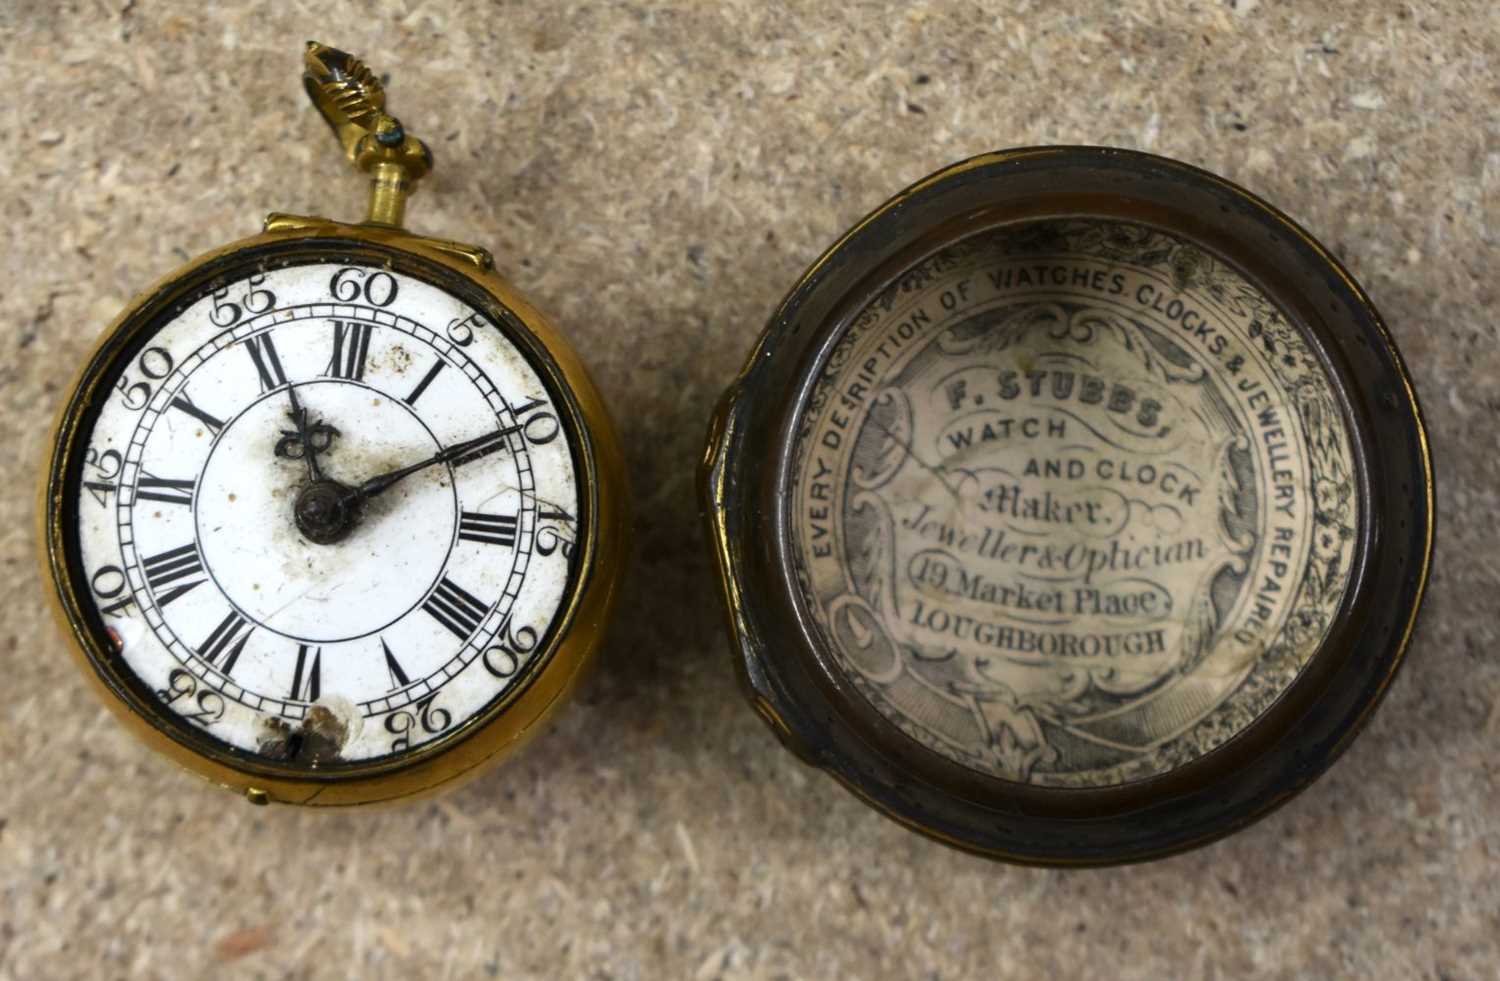 Gents pair case, verge/fusee, key wound and set, open face pocket watch, made by C. Charleson, - Image 2 of 7